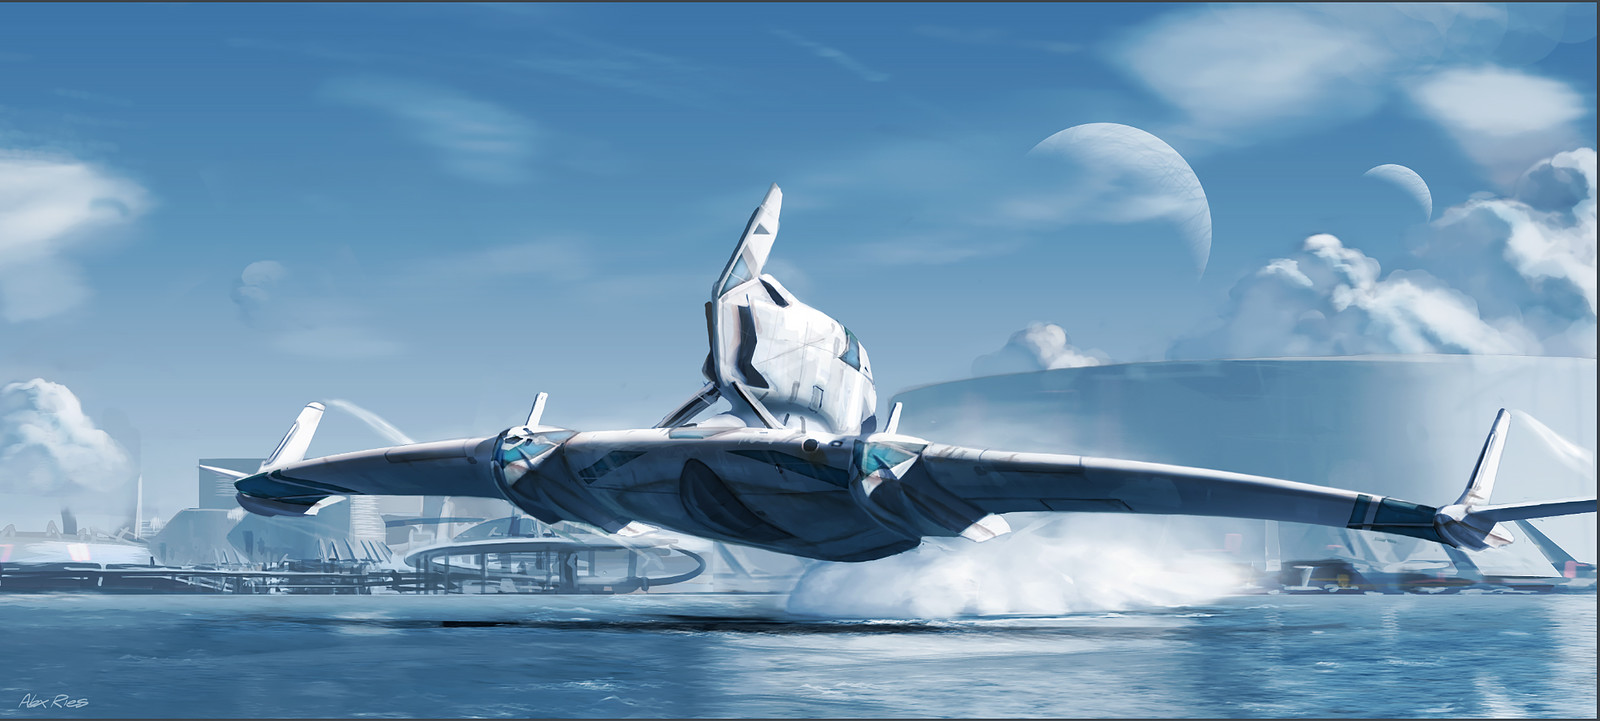 A seaplane from the Birrin project.